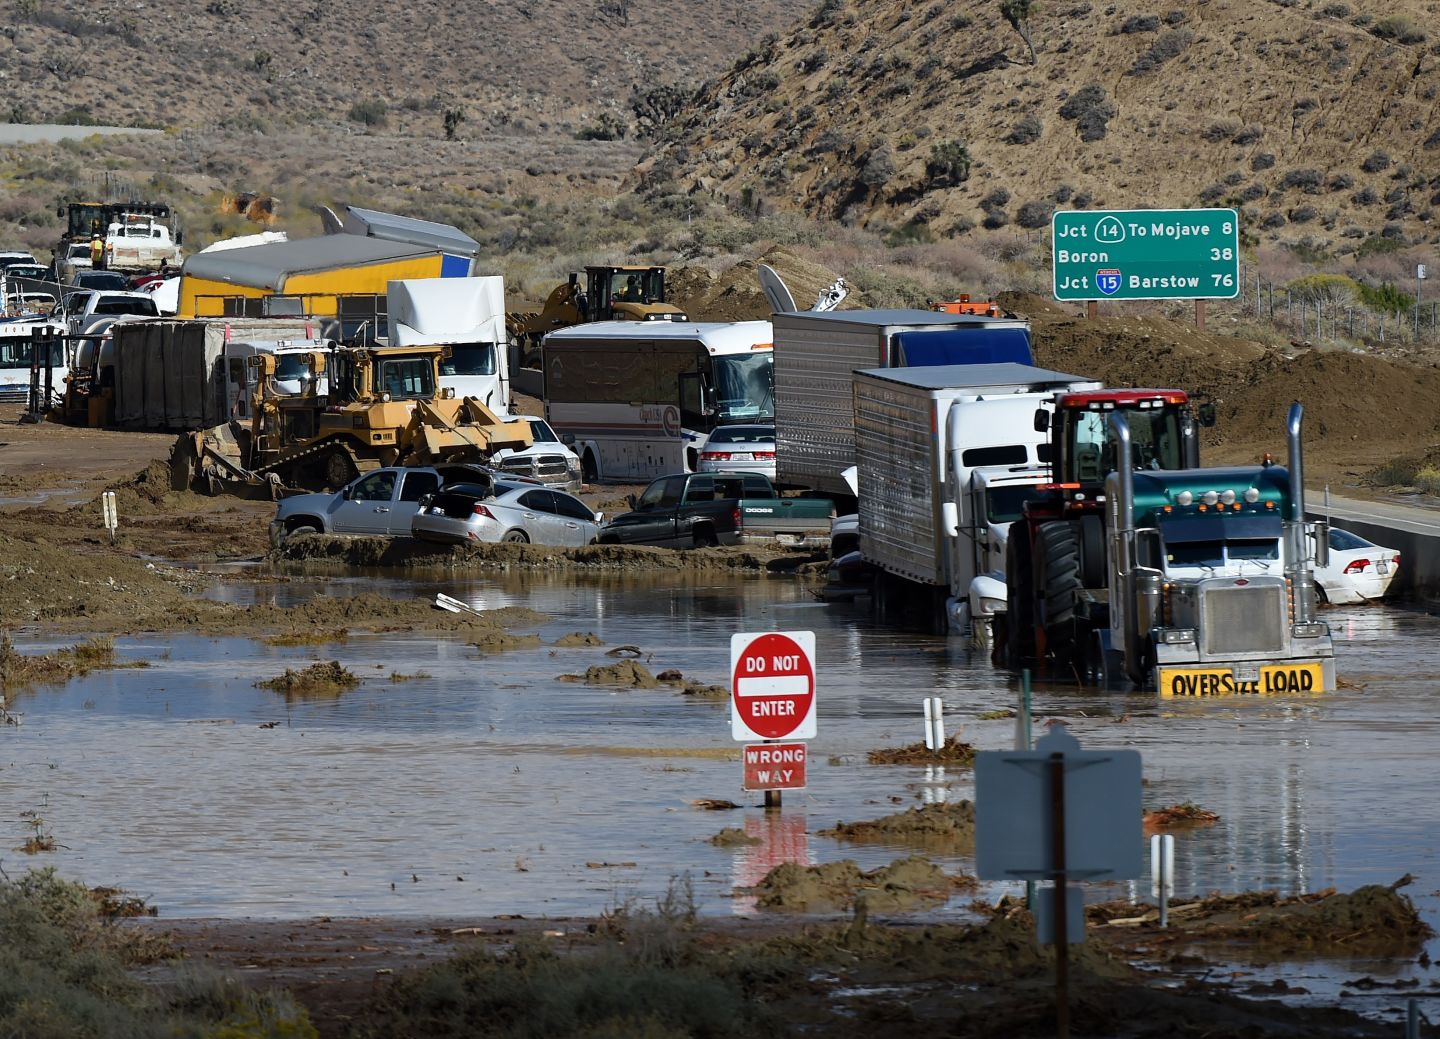 Vehicles trapped on Highway 58 between the towns of Tehachapi and Mojave.  Most vehicles were freed over the weekend, but the highway remains closed. Mark Ralston/AFP-Getty Images